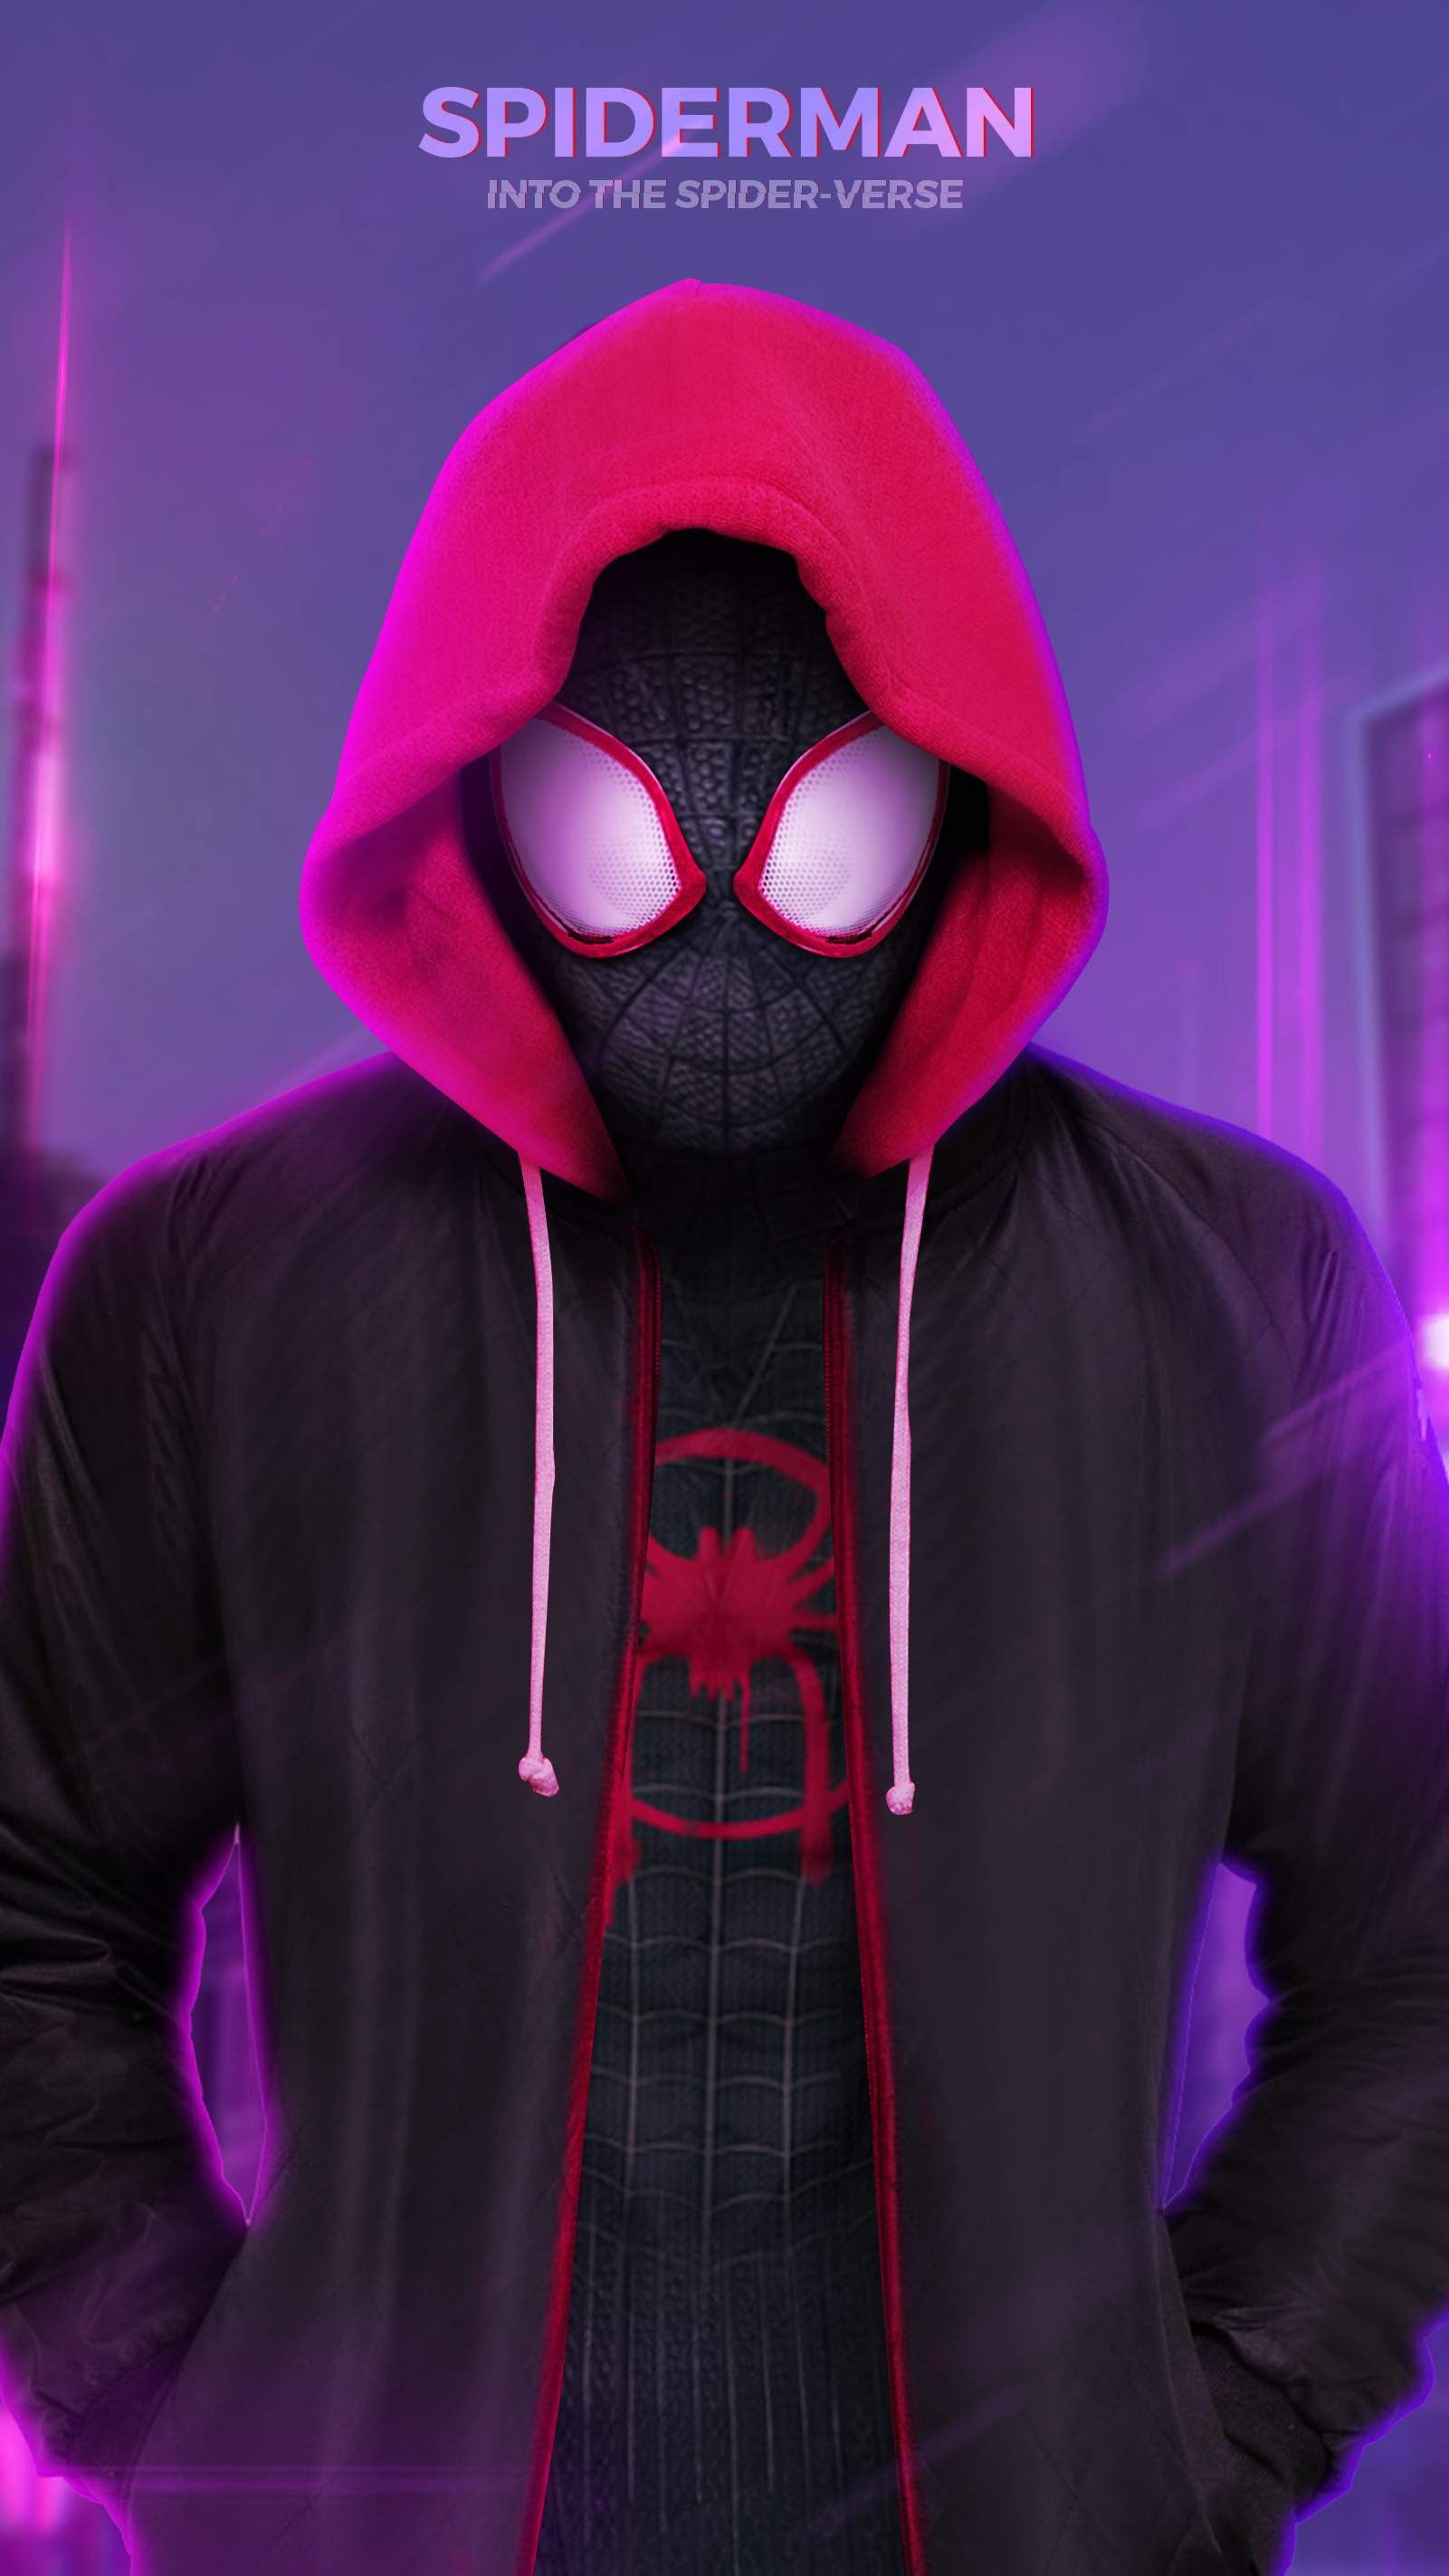 Spiderman into the spider verse iphone wallpaper spiderman spiderman cartoon miles spiderman